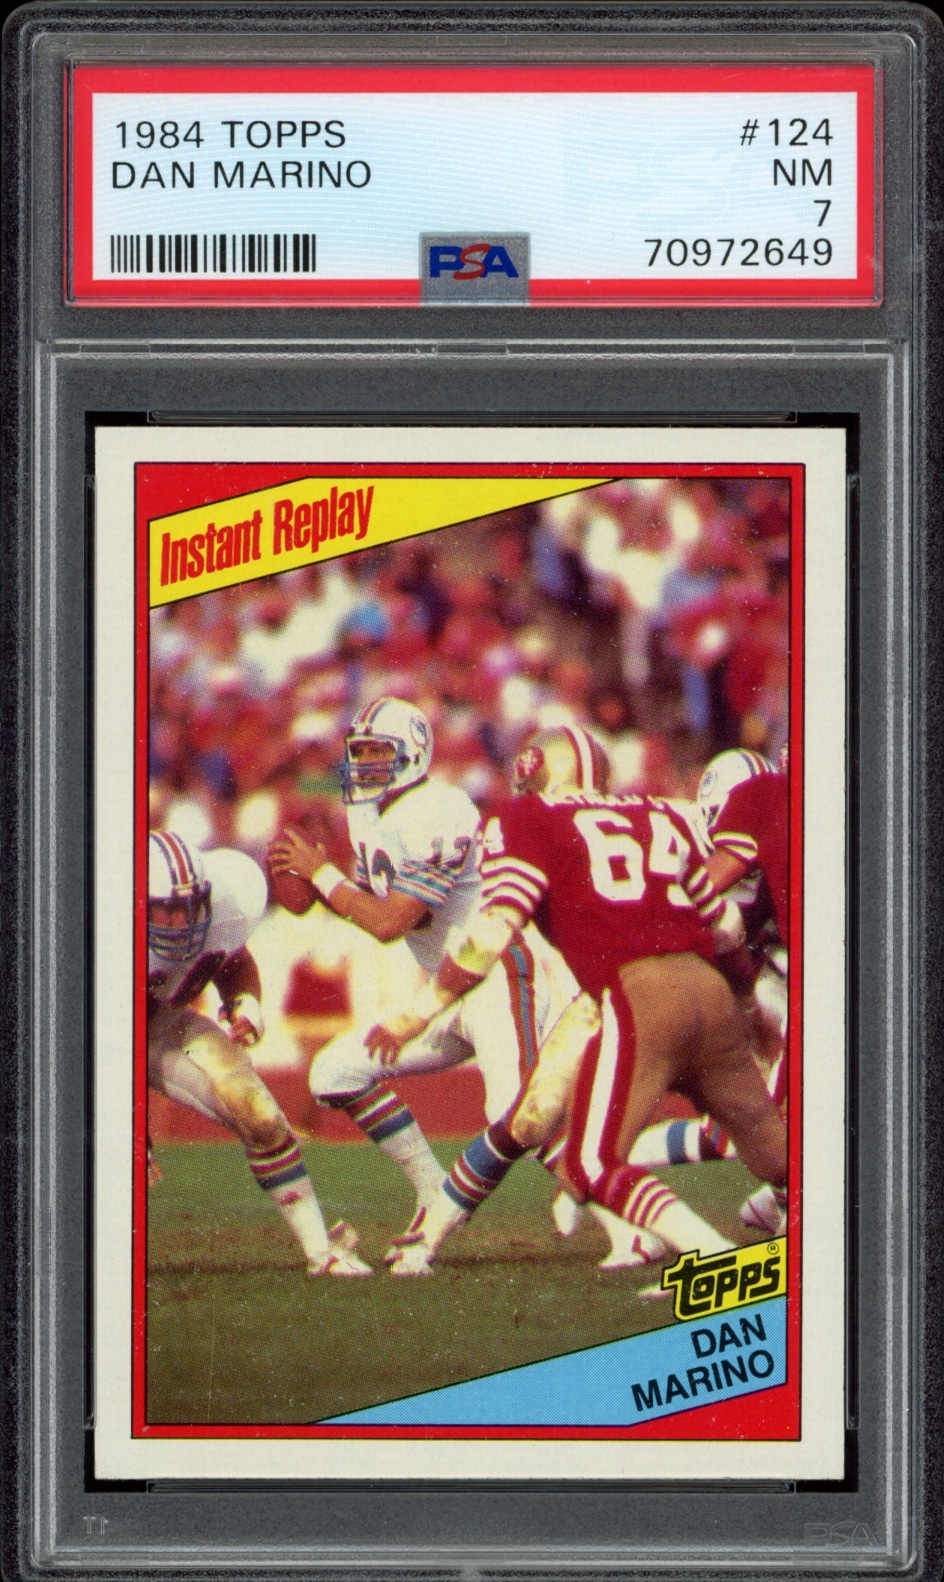 1984 Topps Dan Marino football card, graded MINT by PSA, featuring action shot on field.